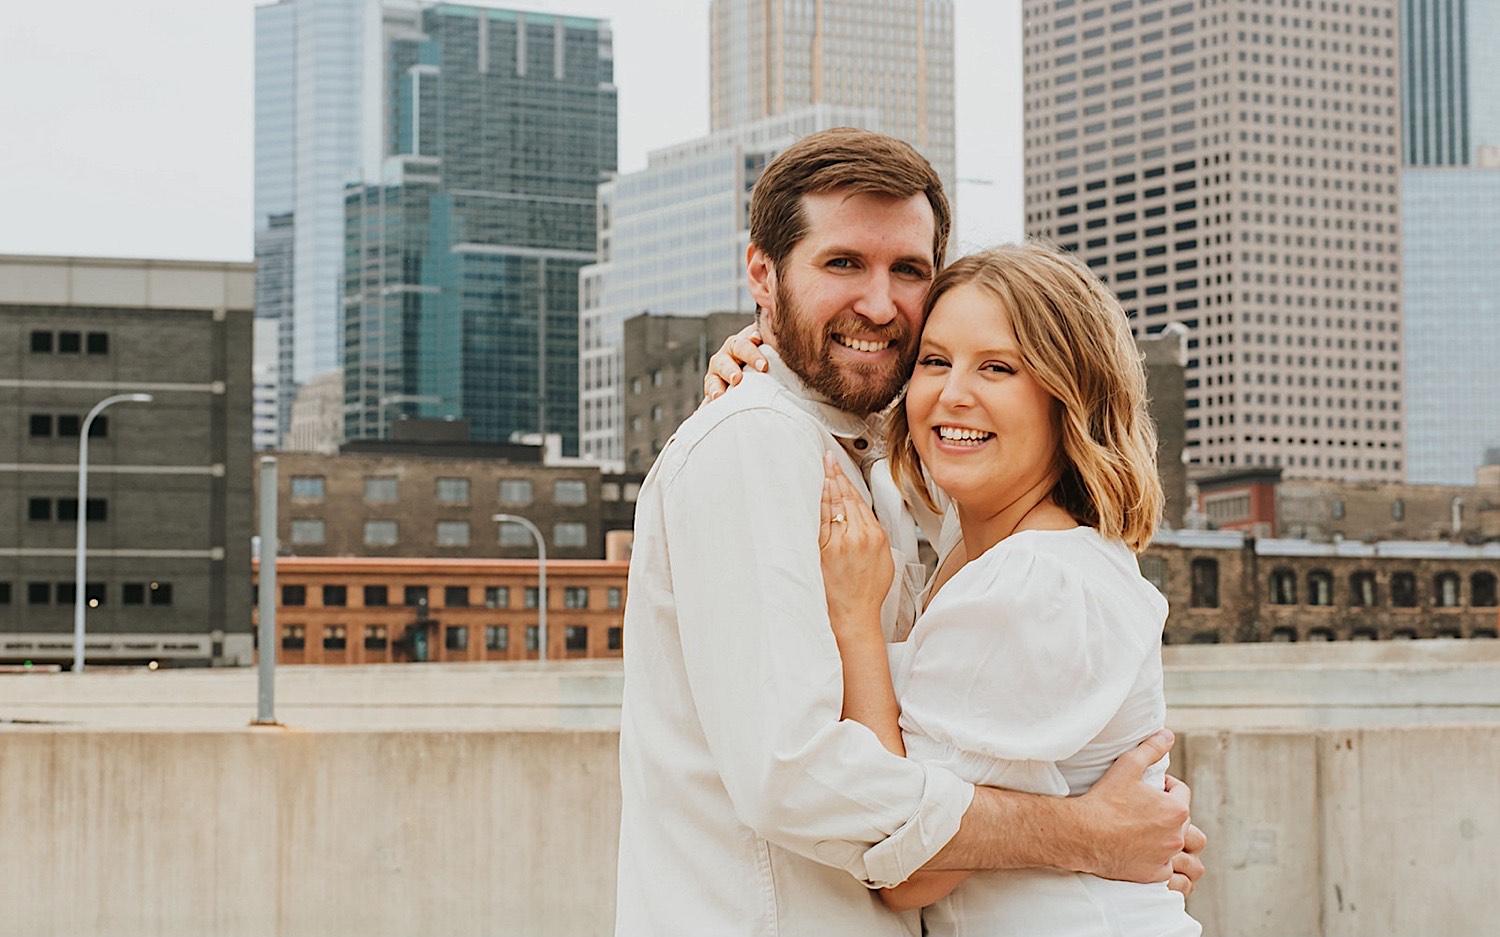 A couple embrace and smile at the camera while the woman shows off her engagement ring as they get their engagement photos taken while on the top level of a parking garage in downtown Minneapolis